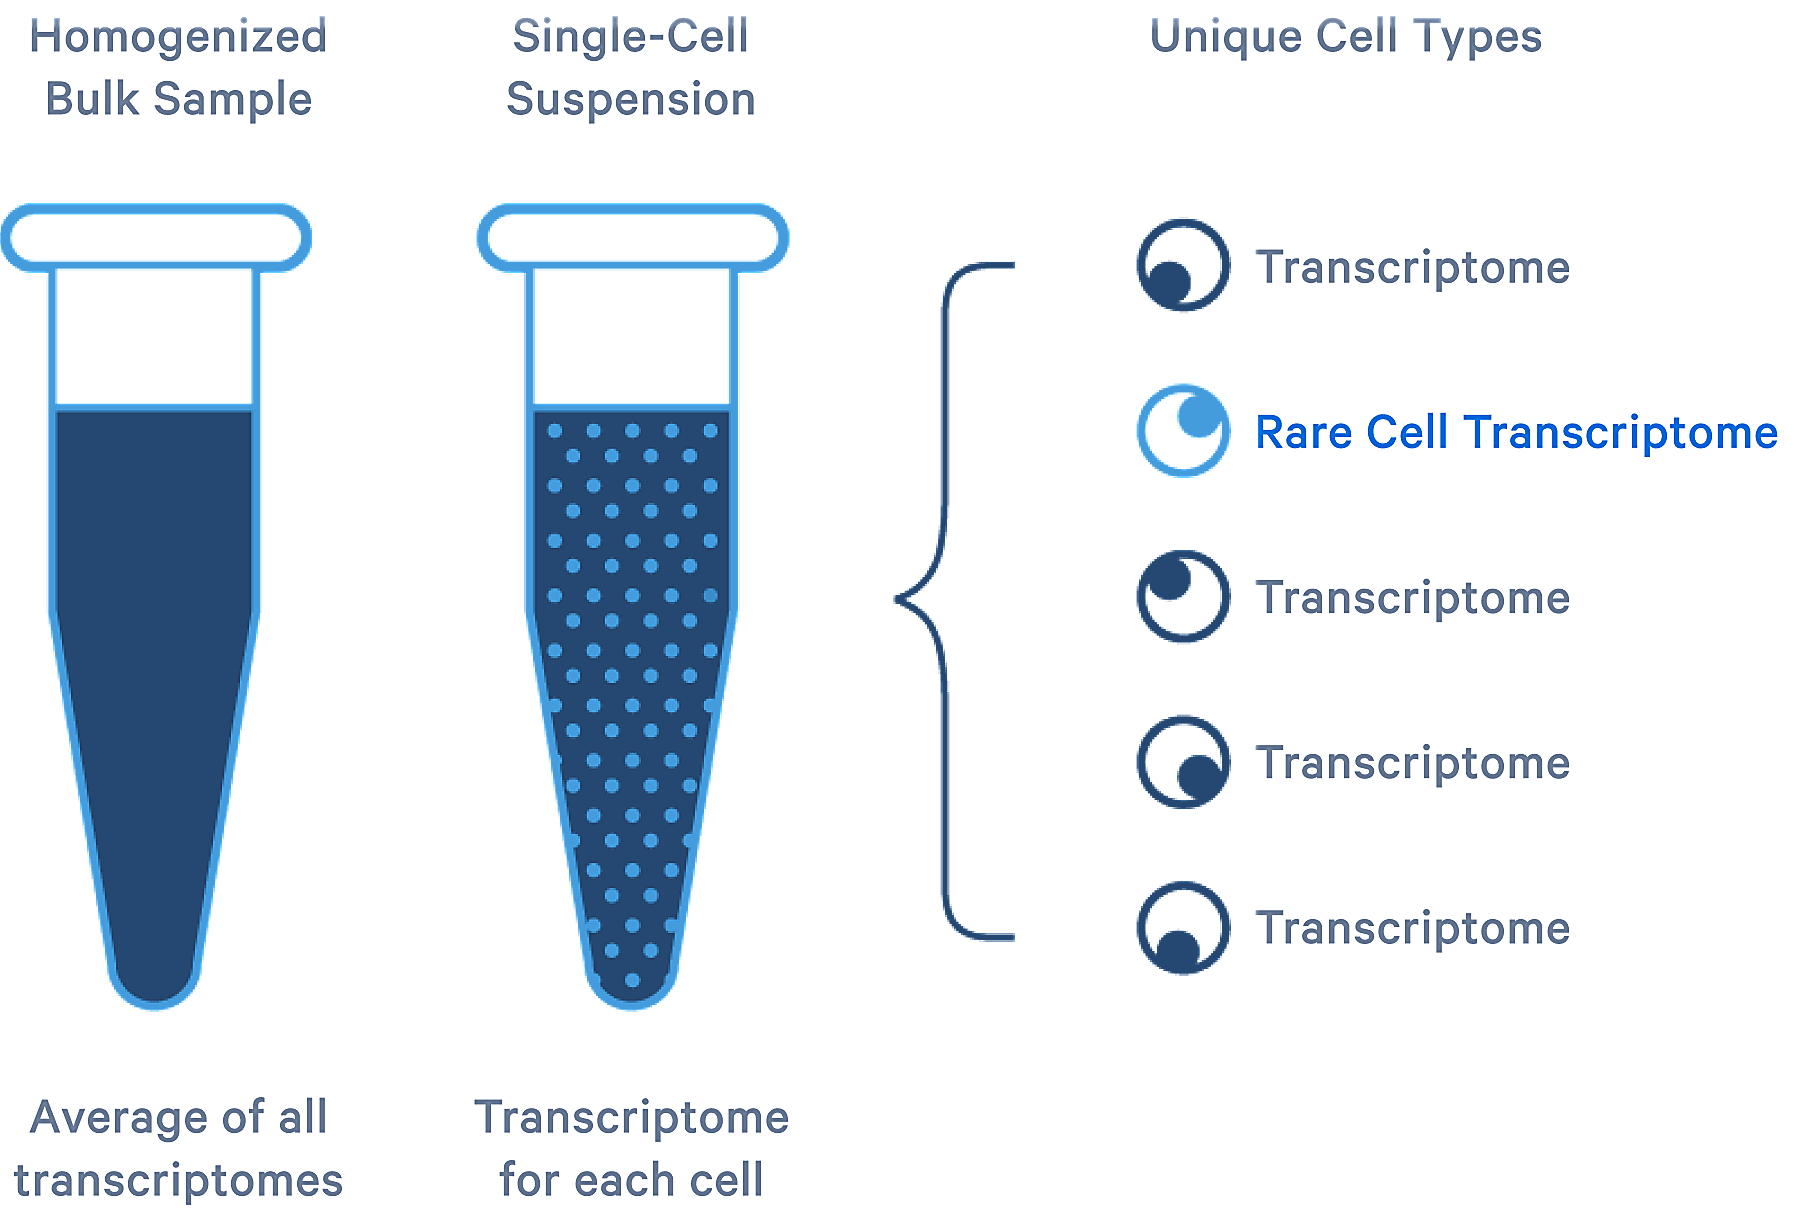 Single cell